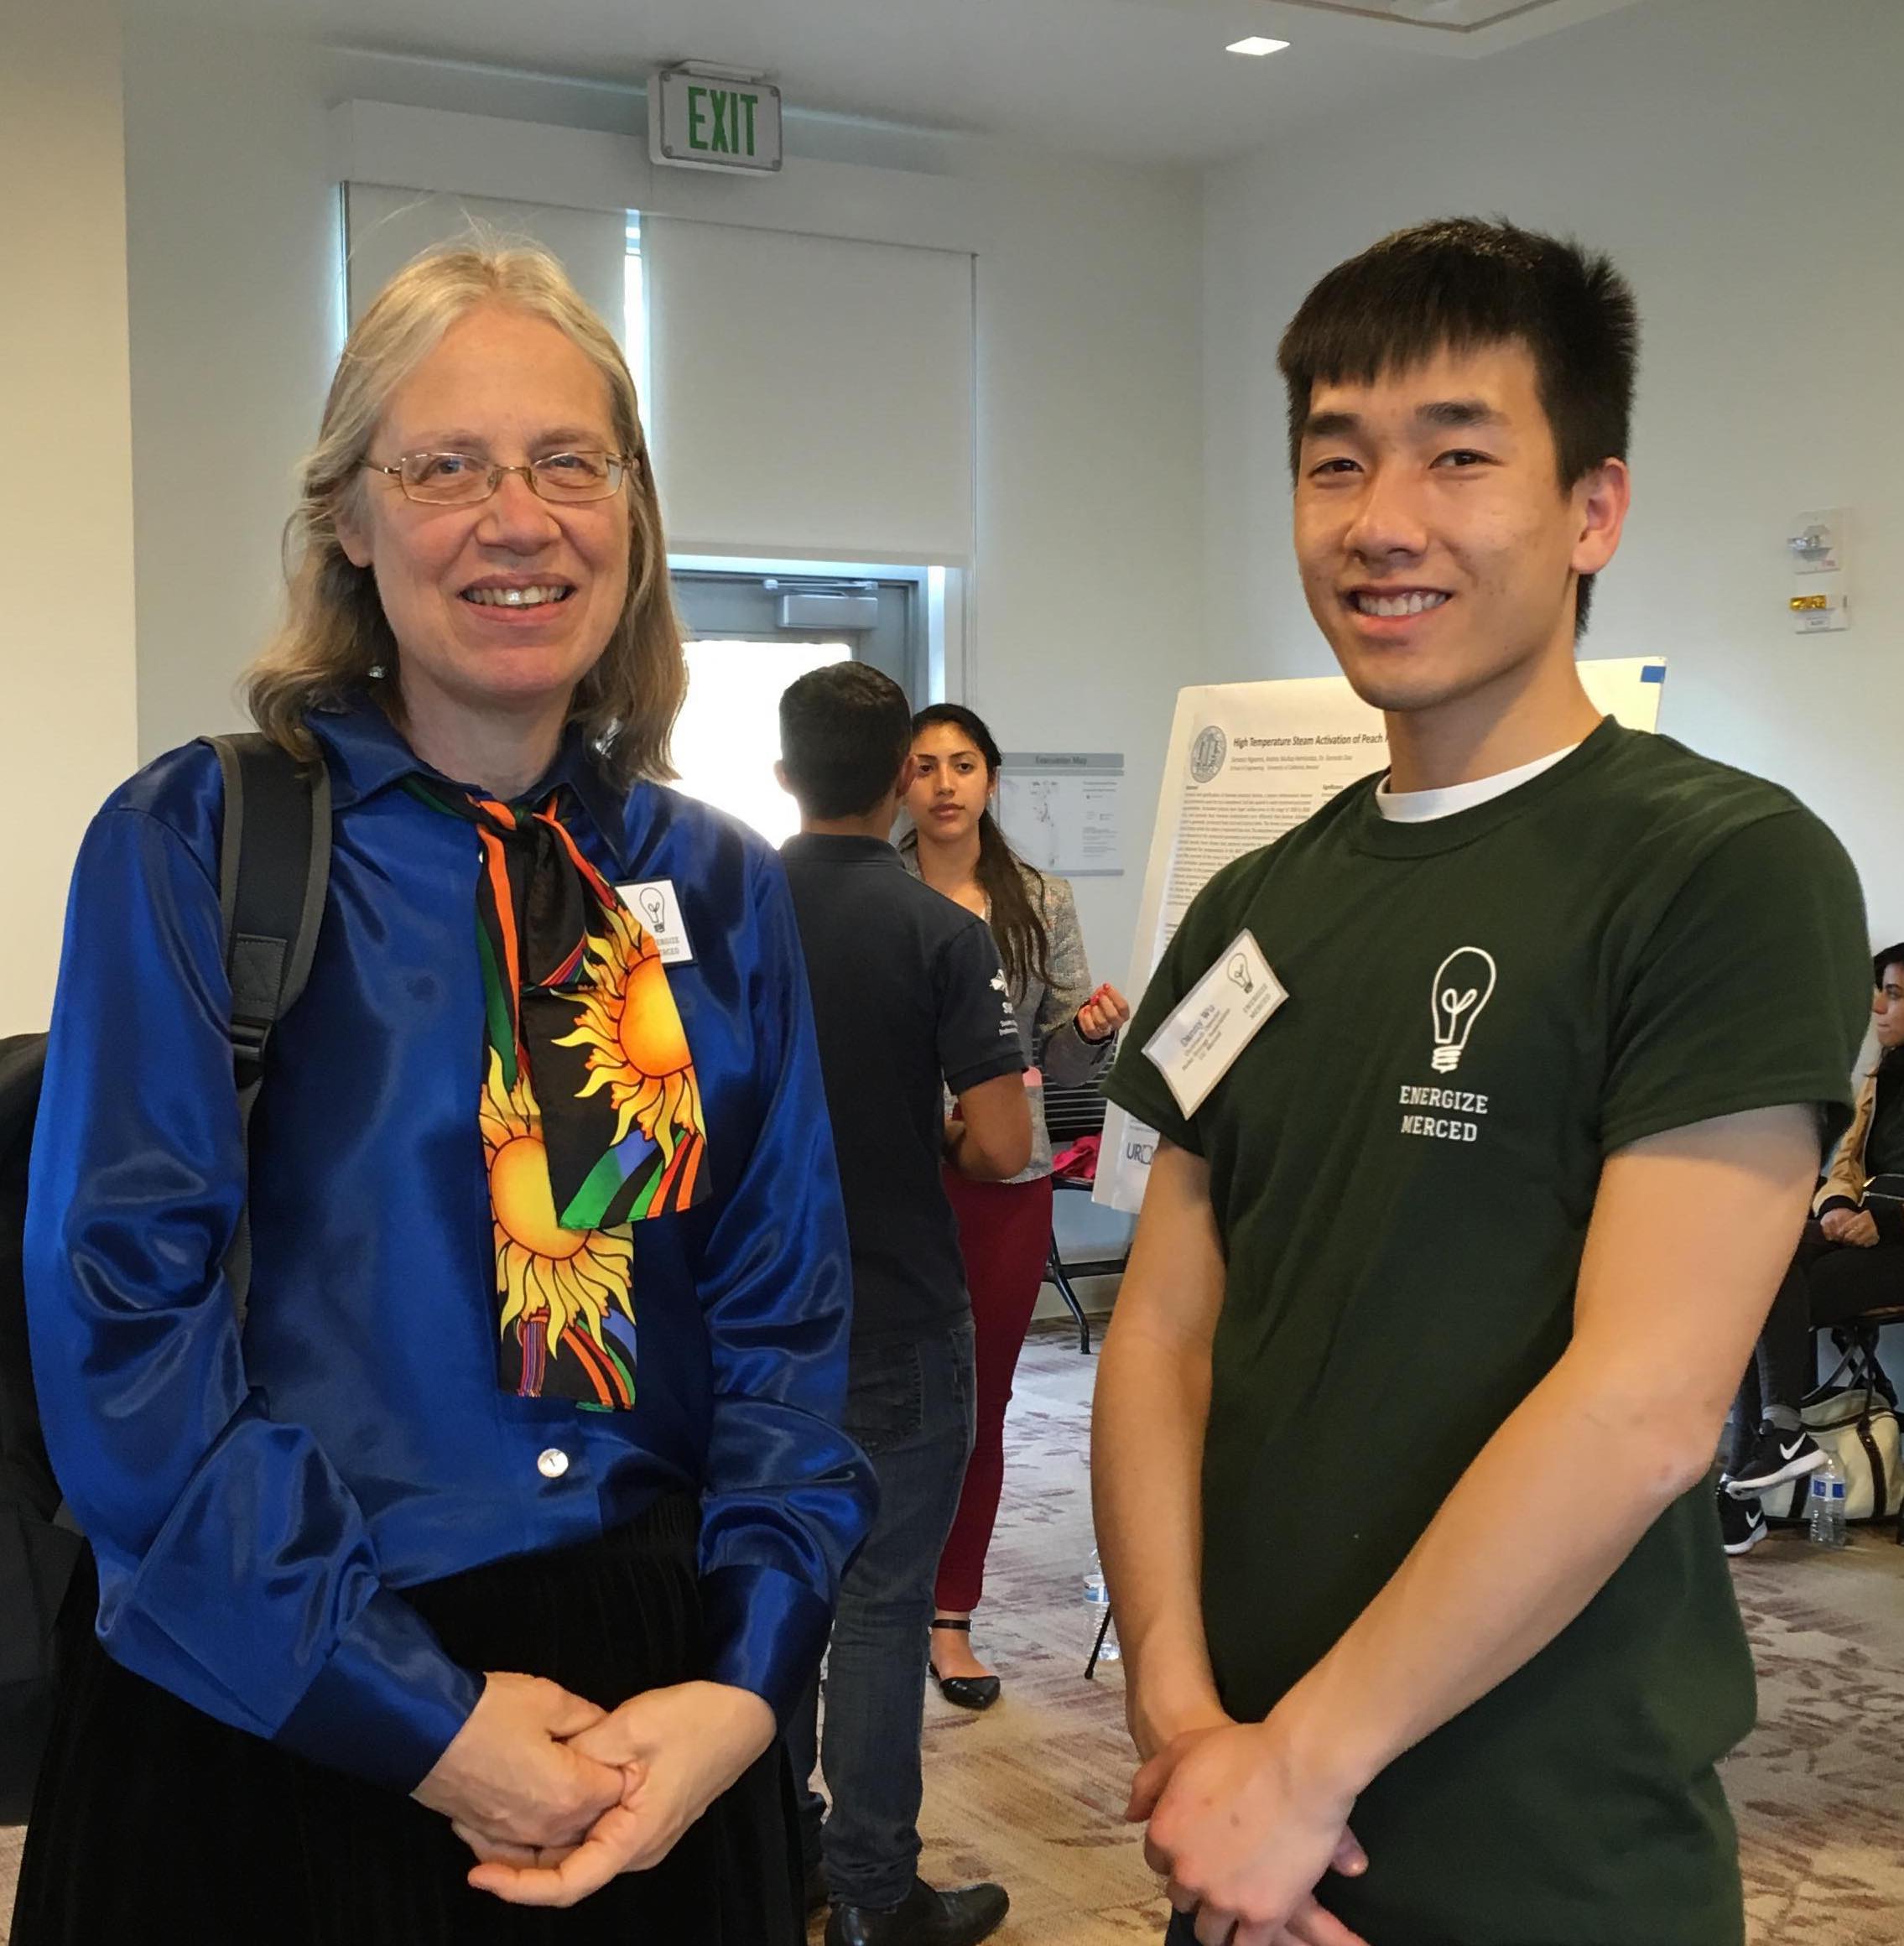 Photo of Dr. Kurtz with a student at Energize Merced 2018